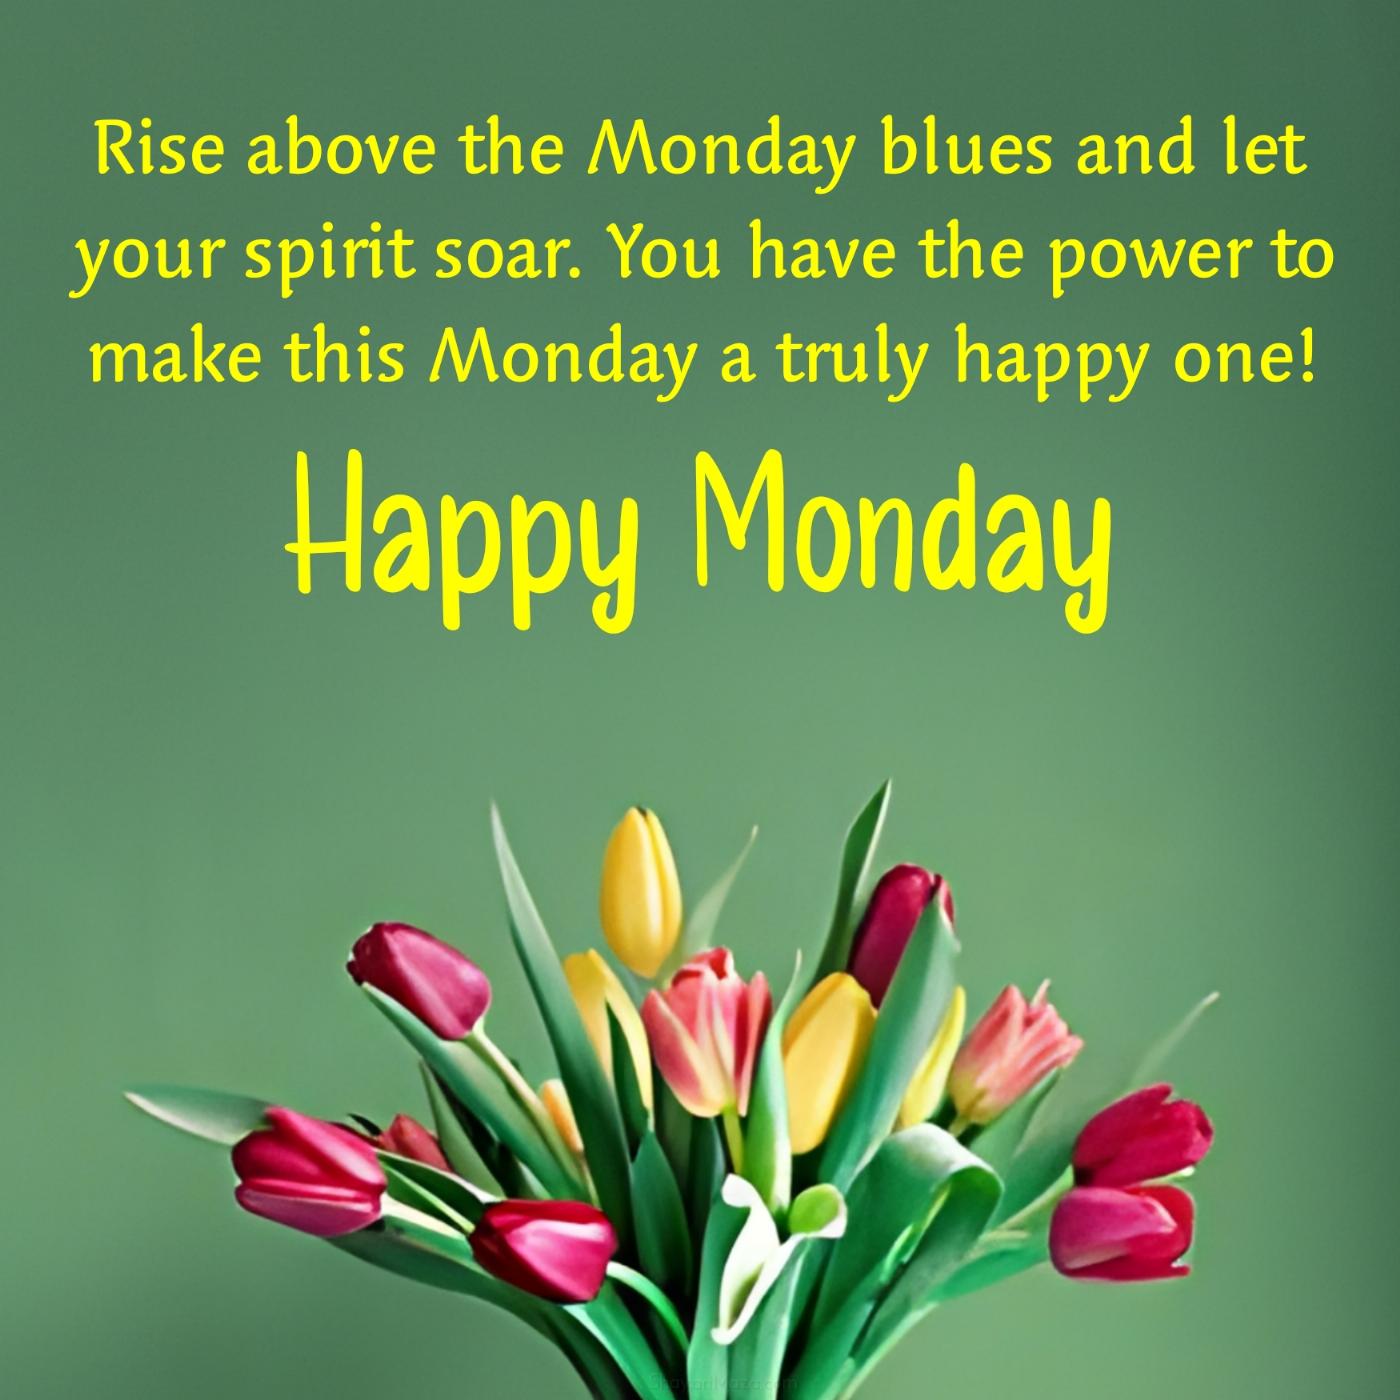 Rise above the Monday blues and let your spirit soar